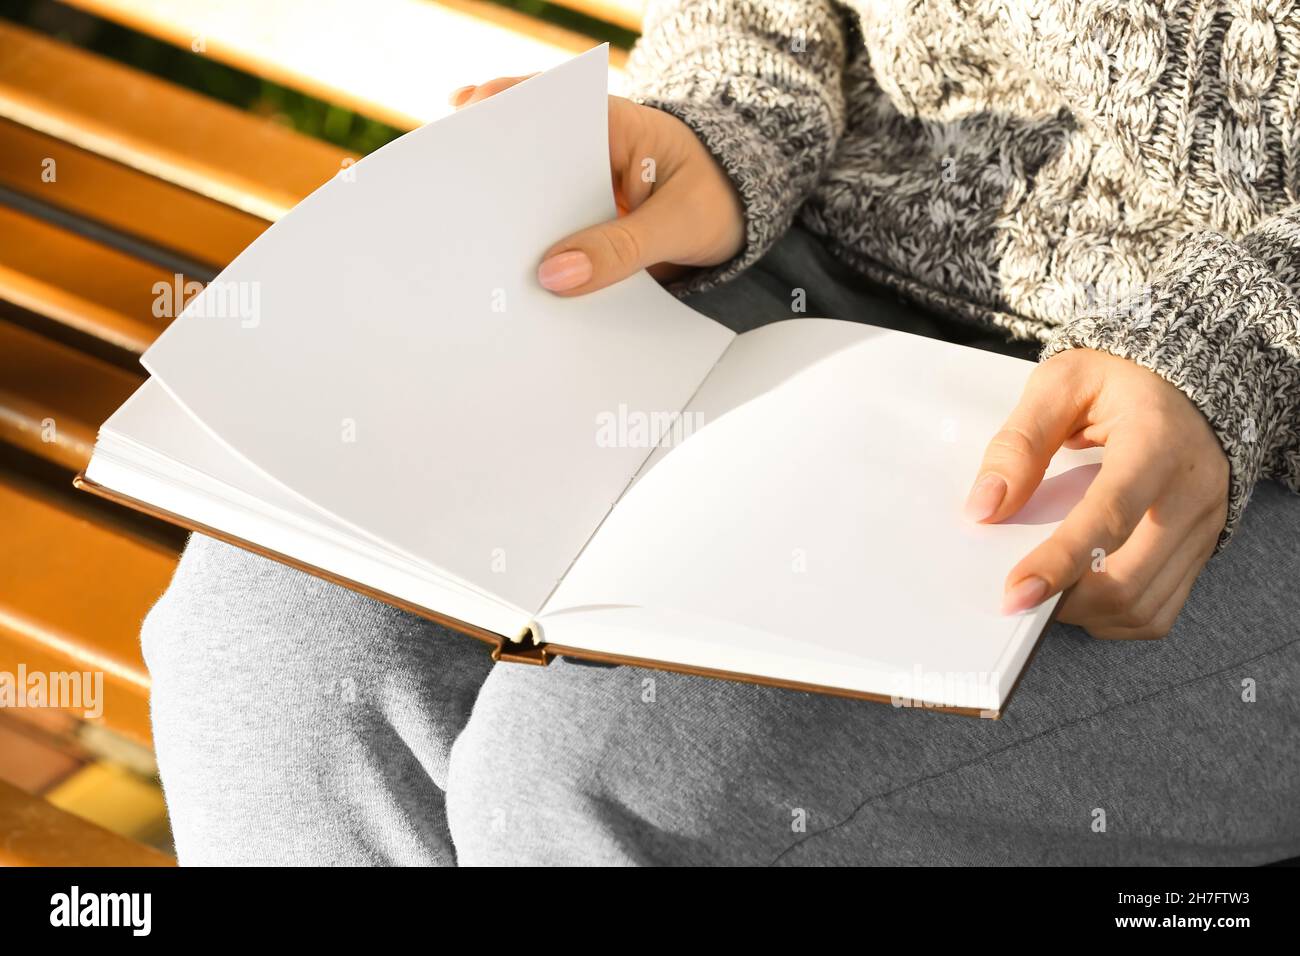 Woman holding book with blank pages · Free Stock Photo